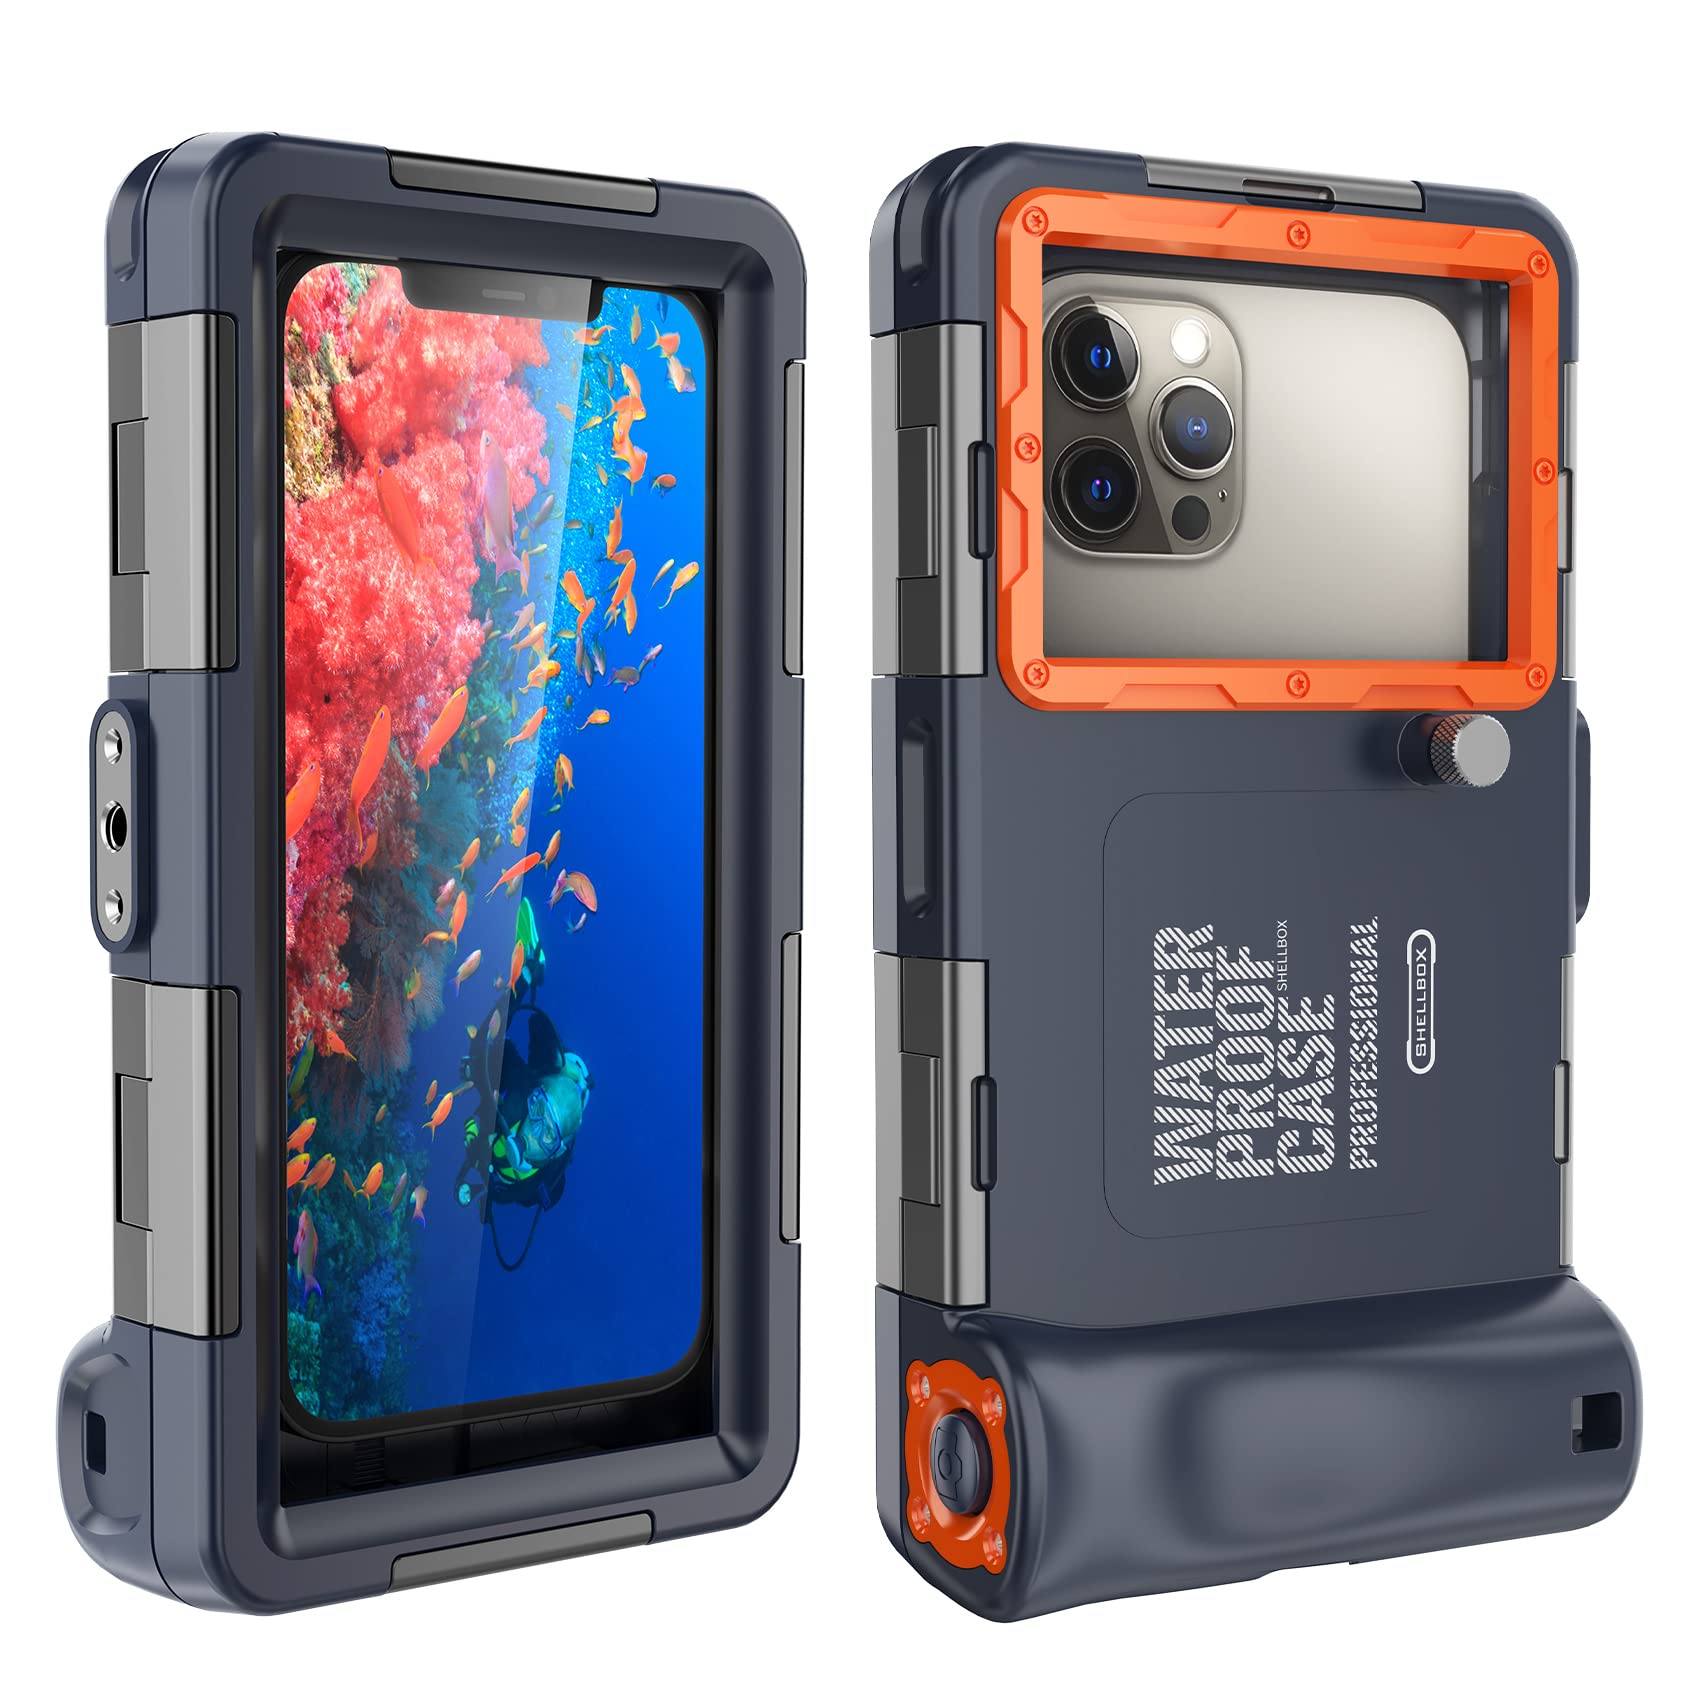 Universal Waterproof Phone Case Water Proof Bag Underwater Dry Bag Mobile  Phone Pouch PV Cover For Samsung Huawei Mi iphone Outdoor Activities